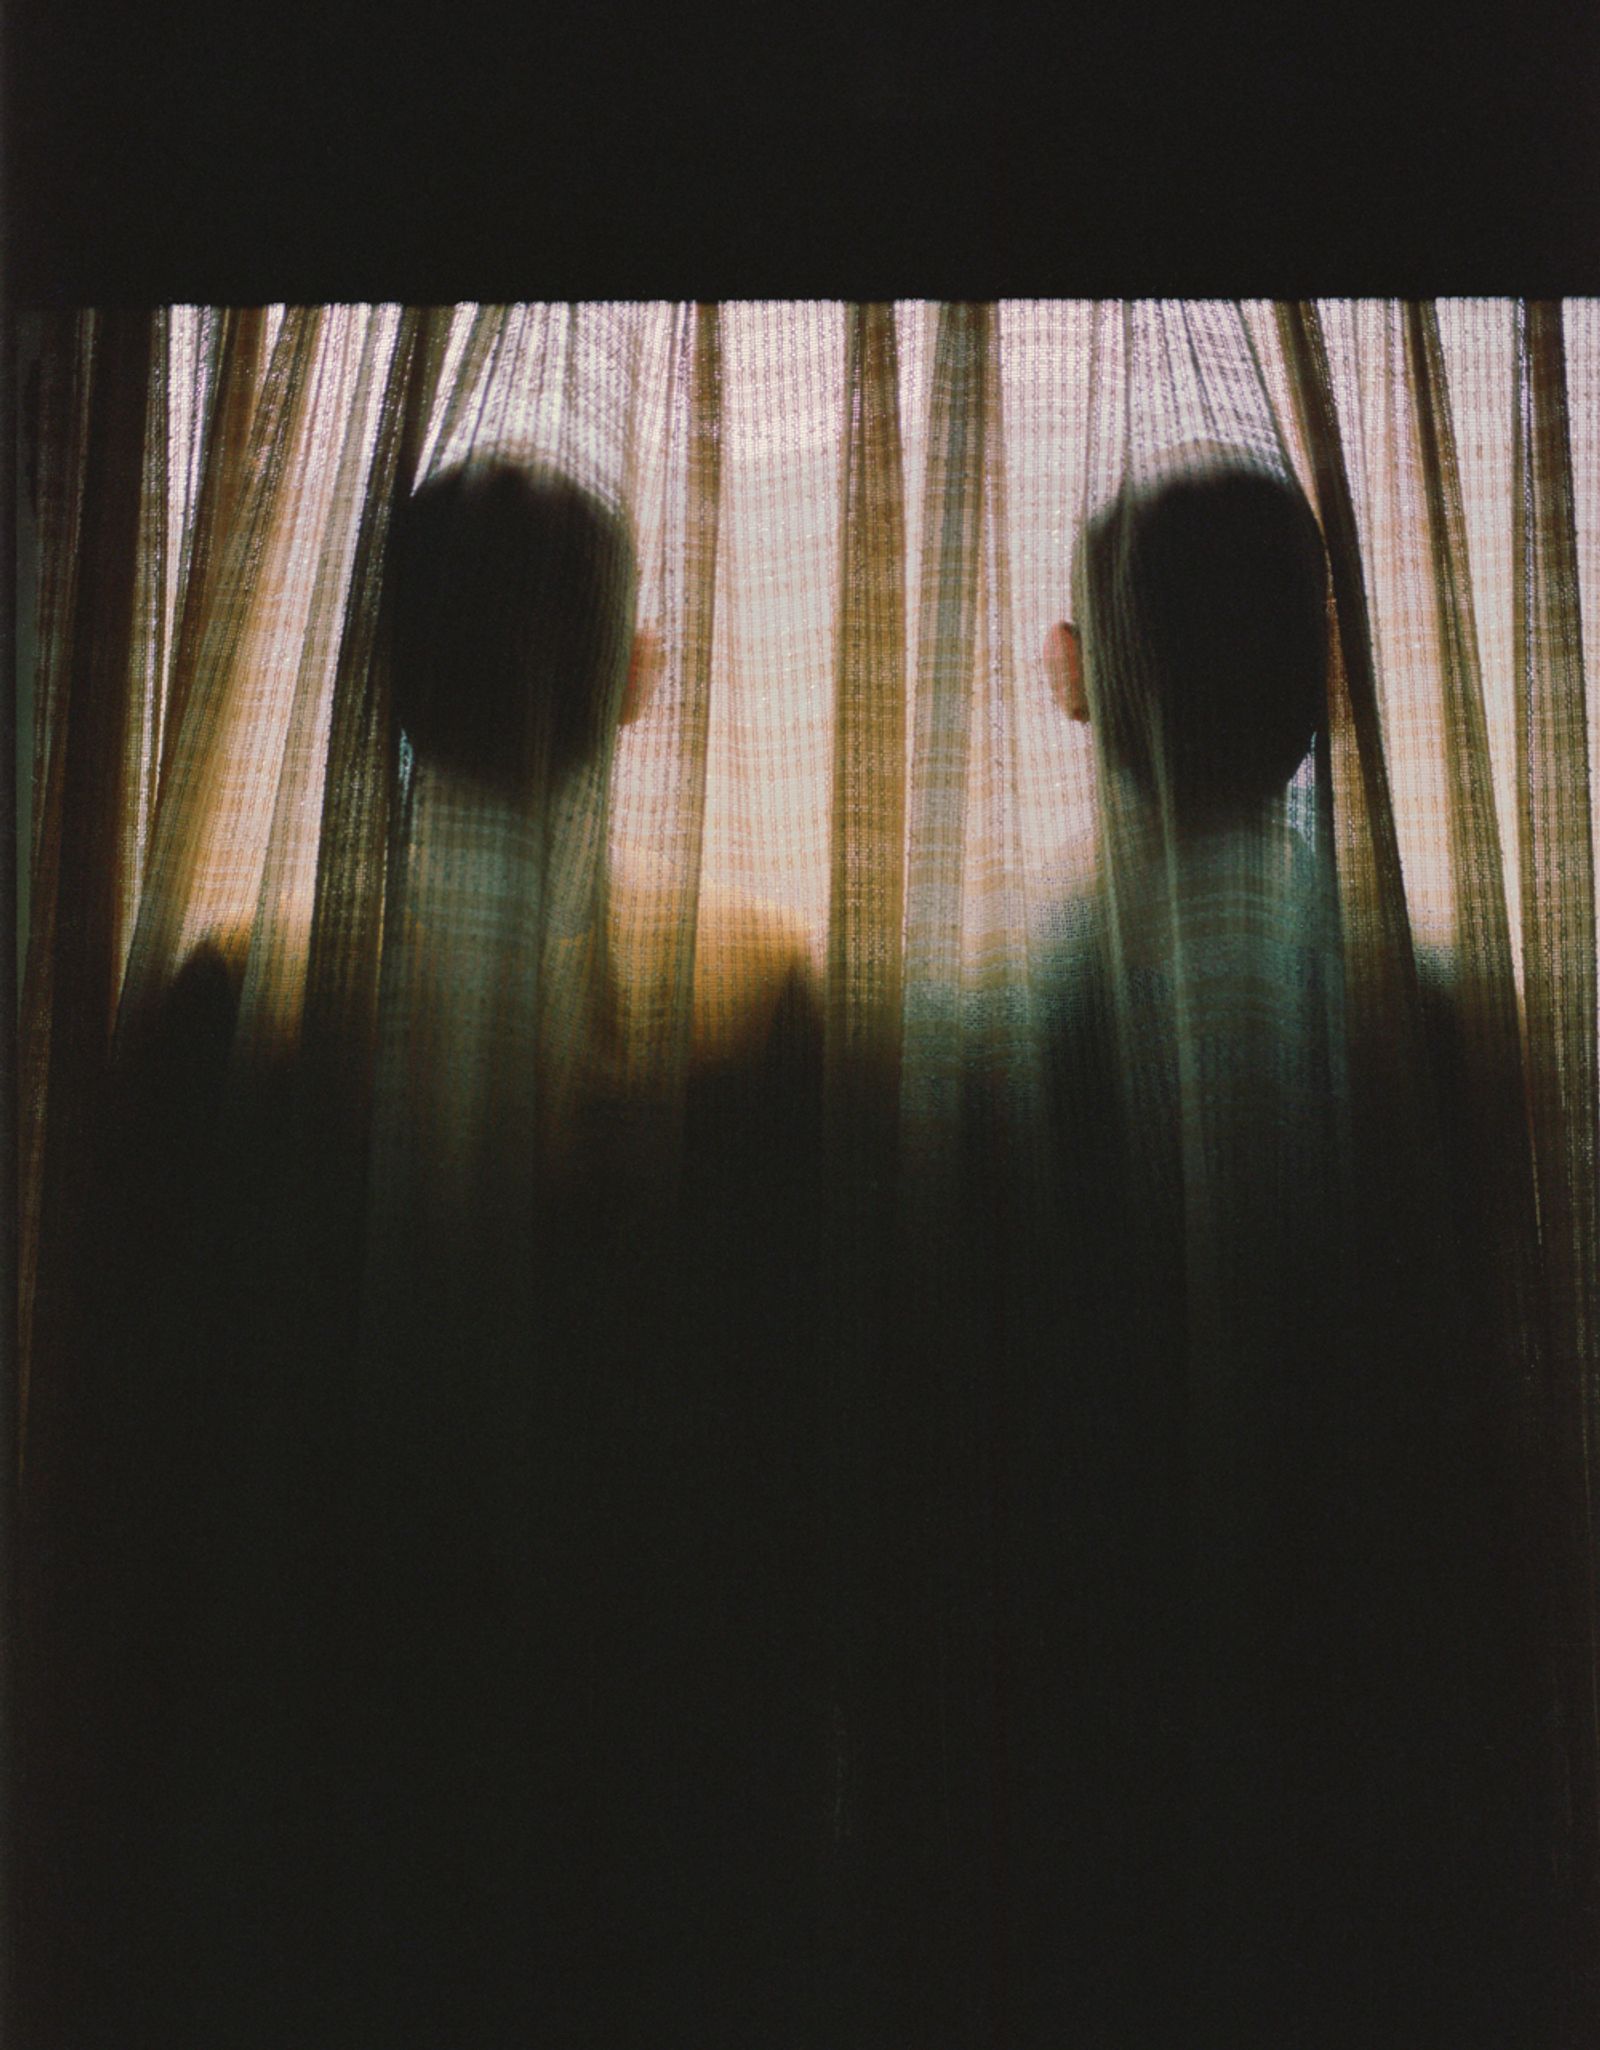 © Juliana Gómez Quijano - Image from the Las Dos Hebras (The Two Strands) photography project